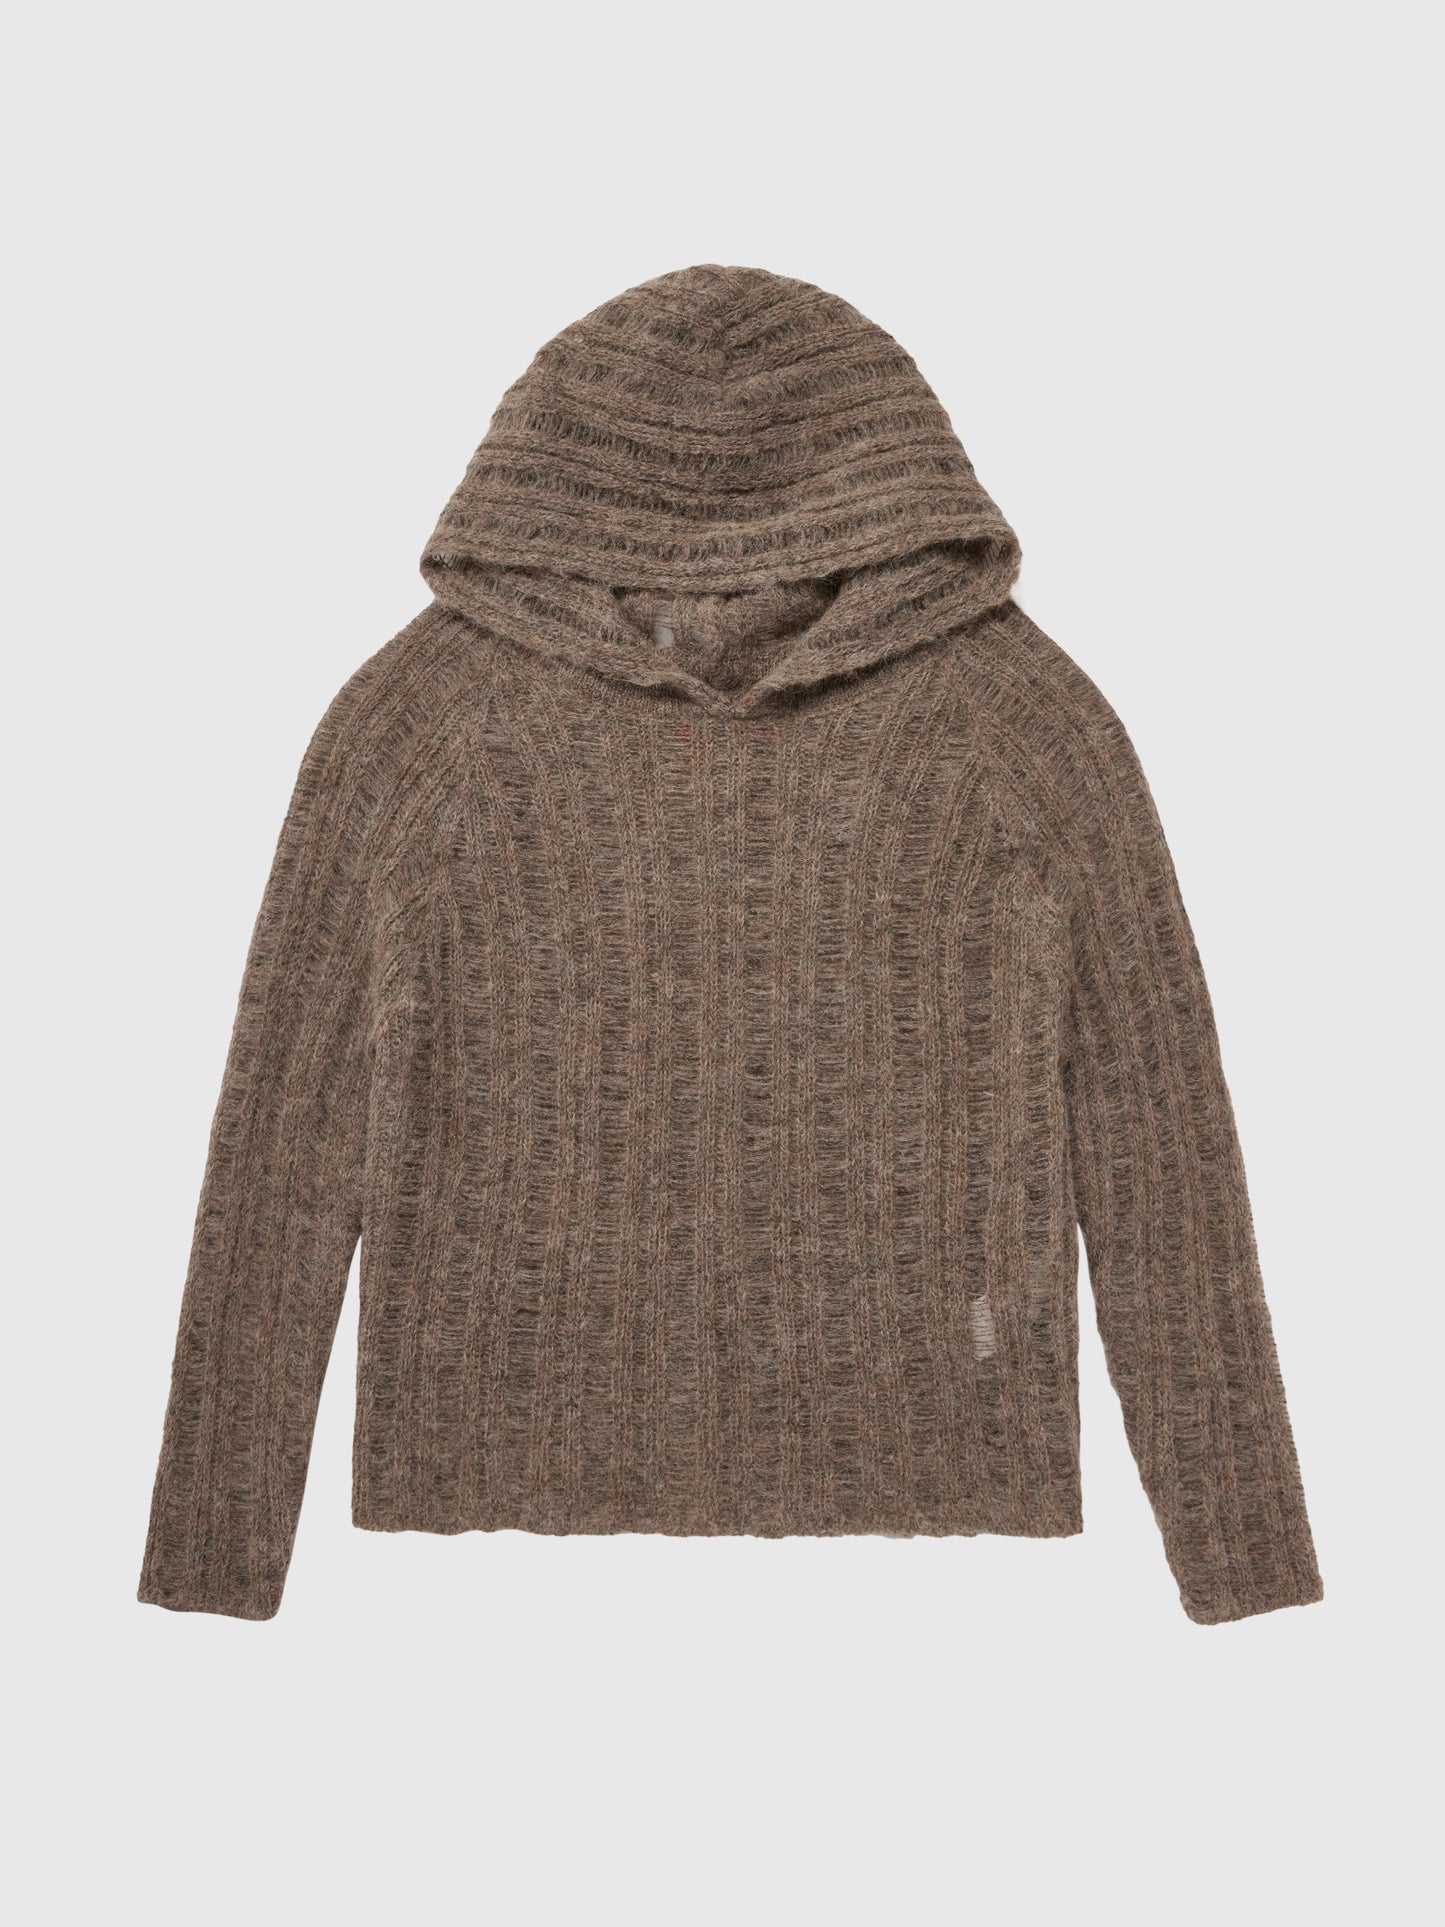 BROWN HOODED SWEATER